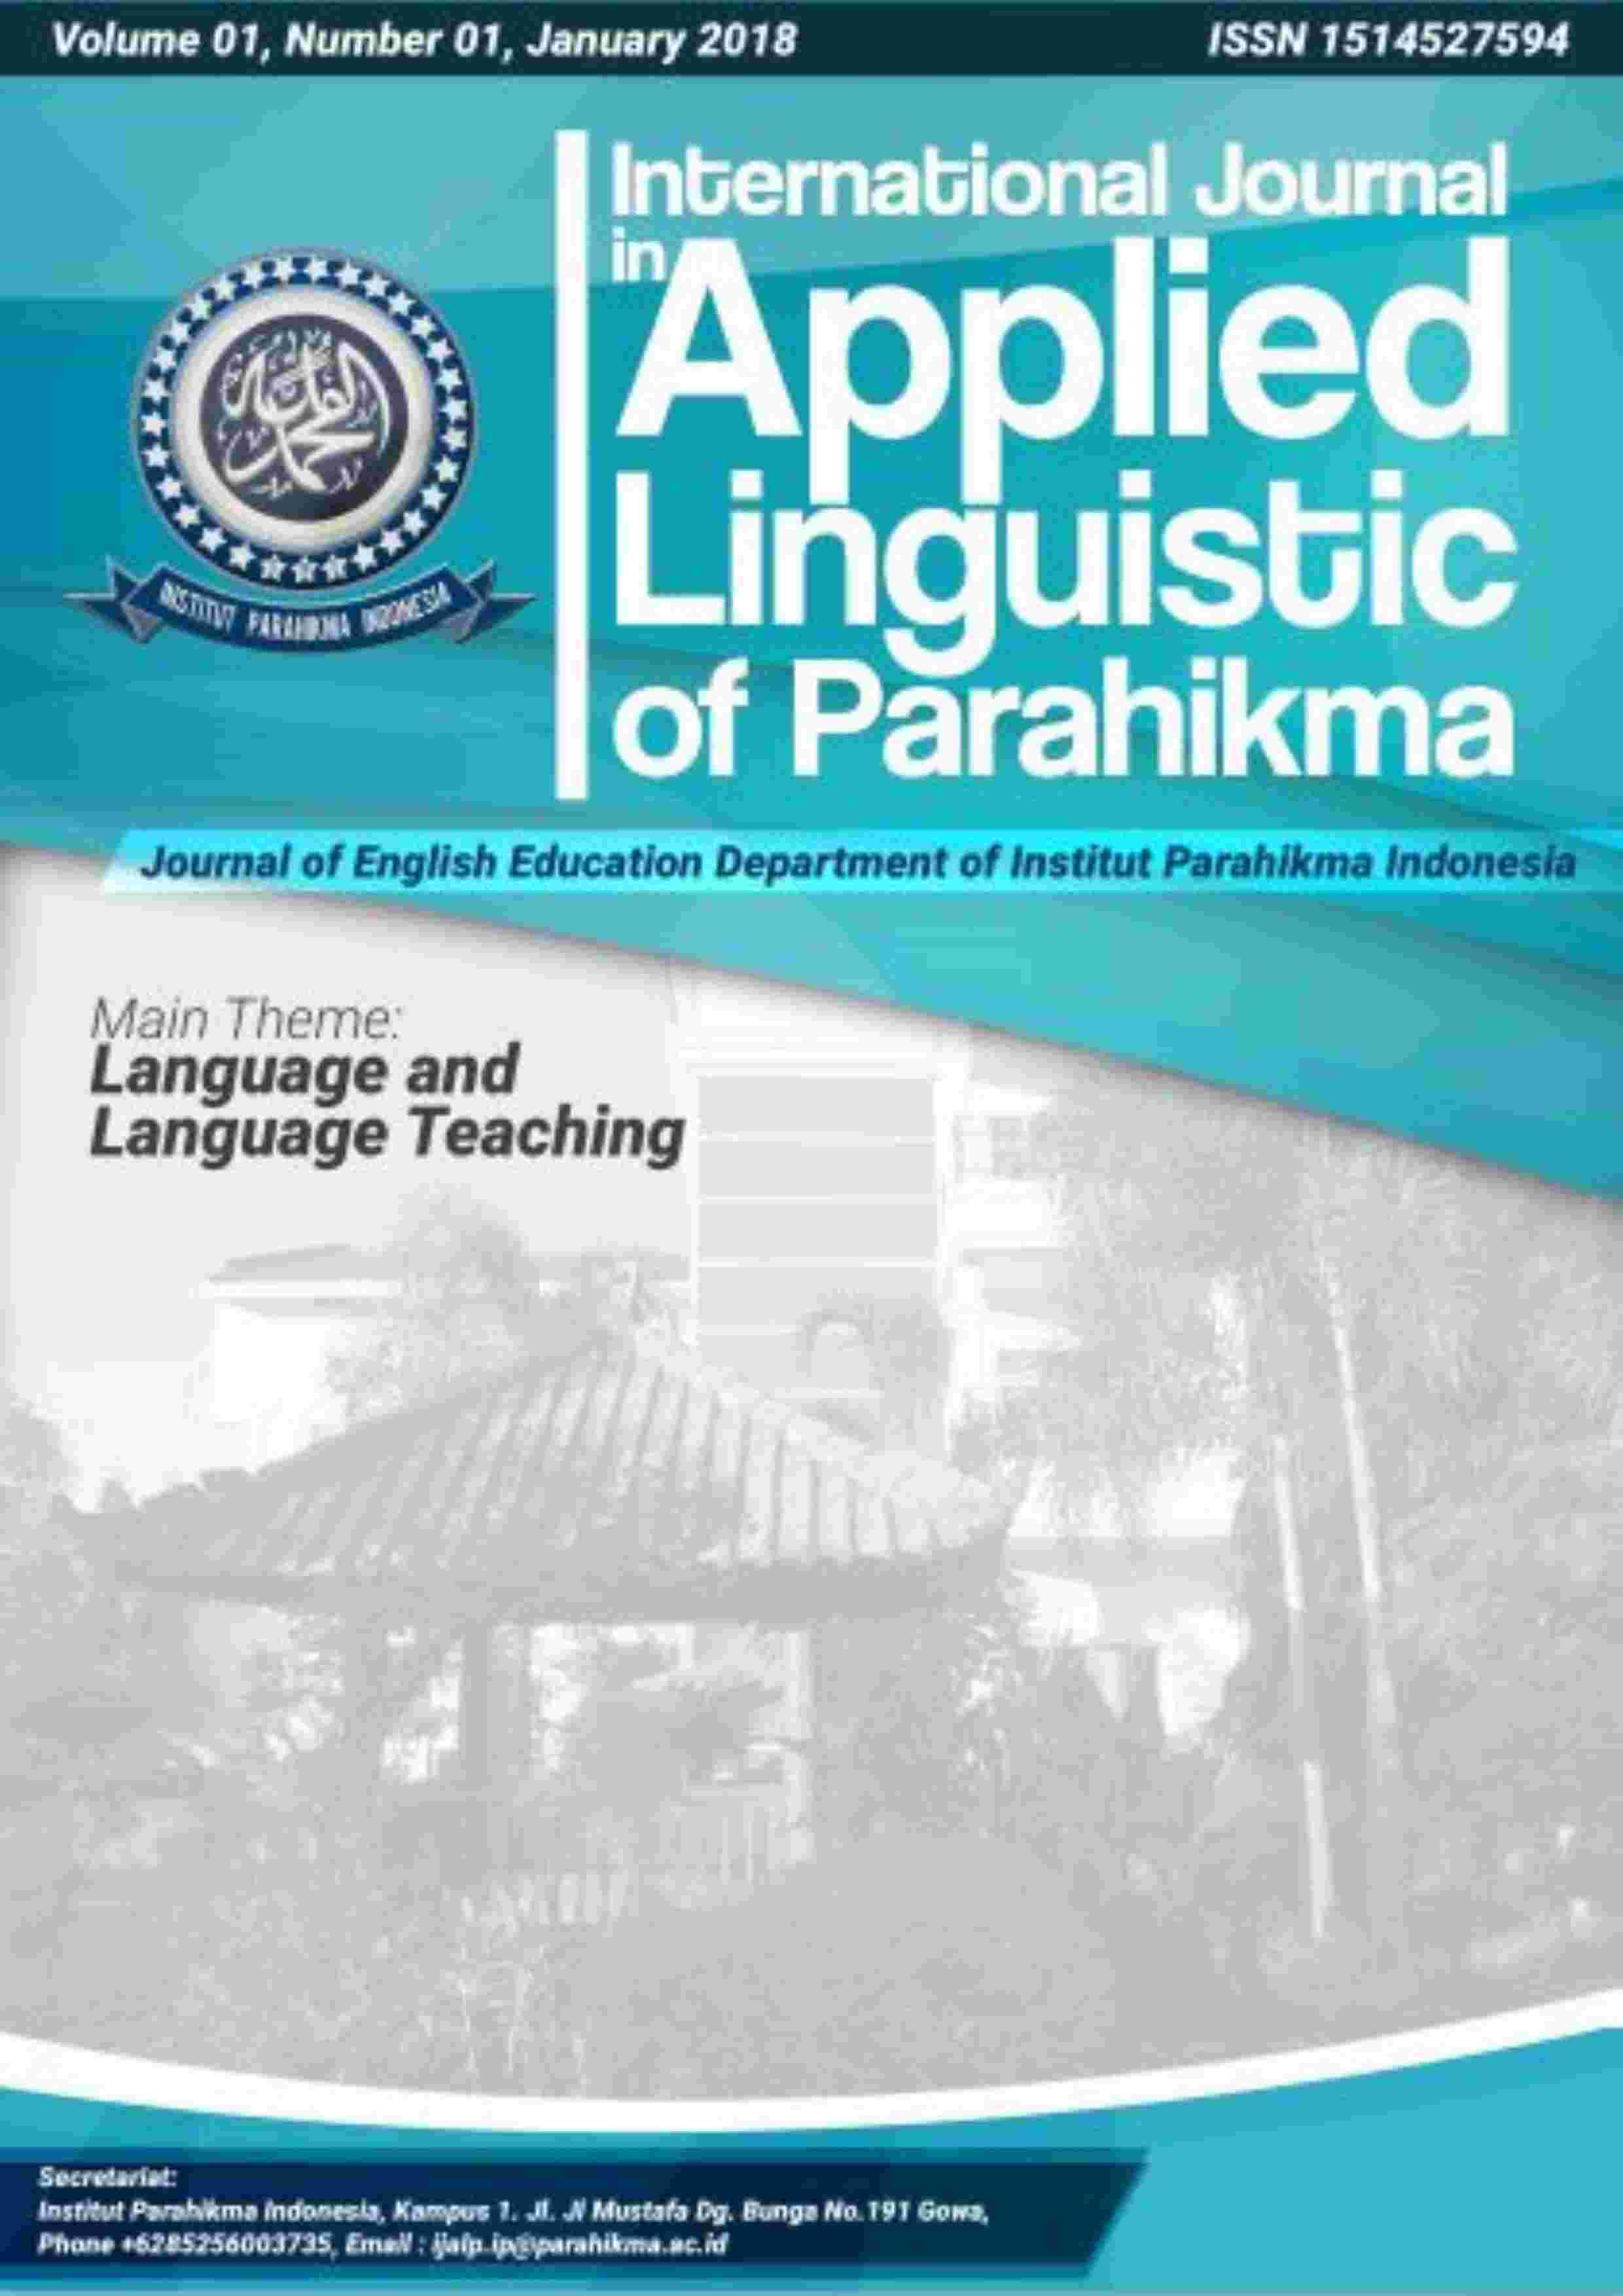 International Journal in Applied Linguistics of Parahikma